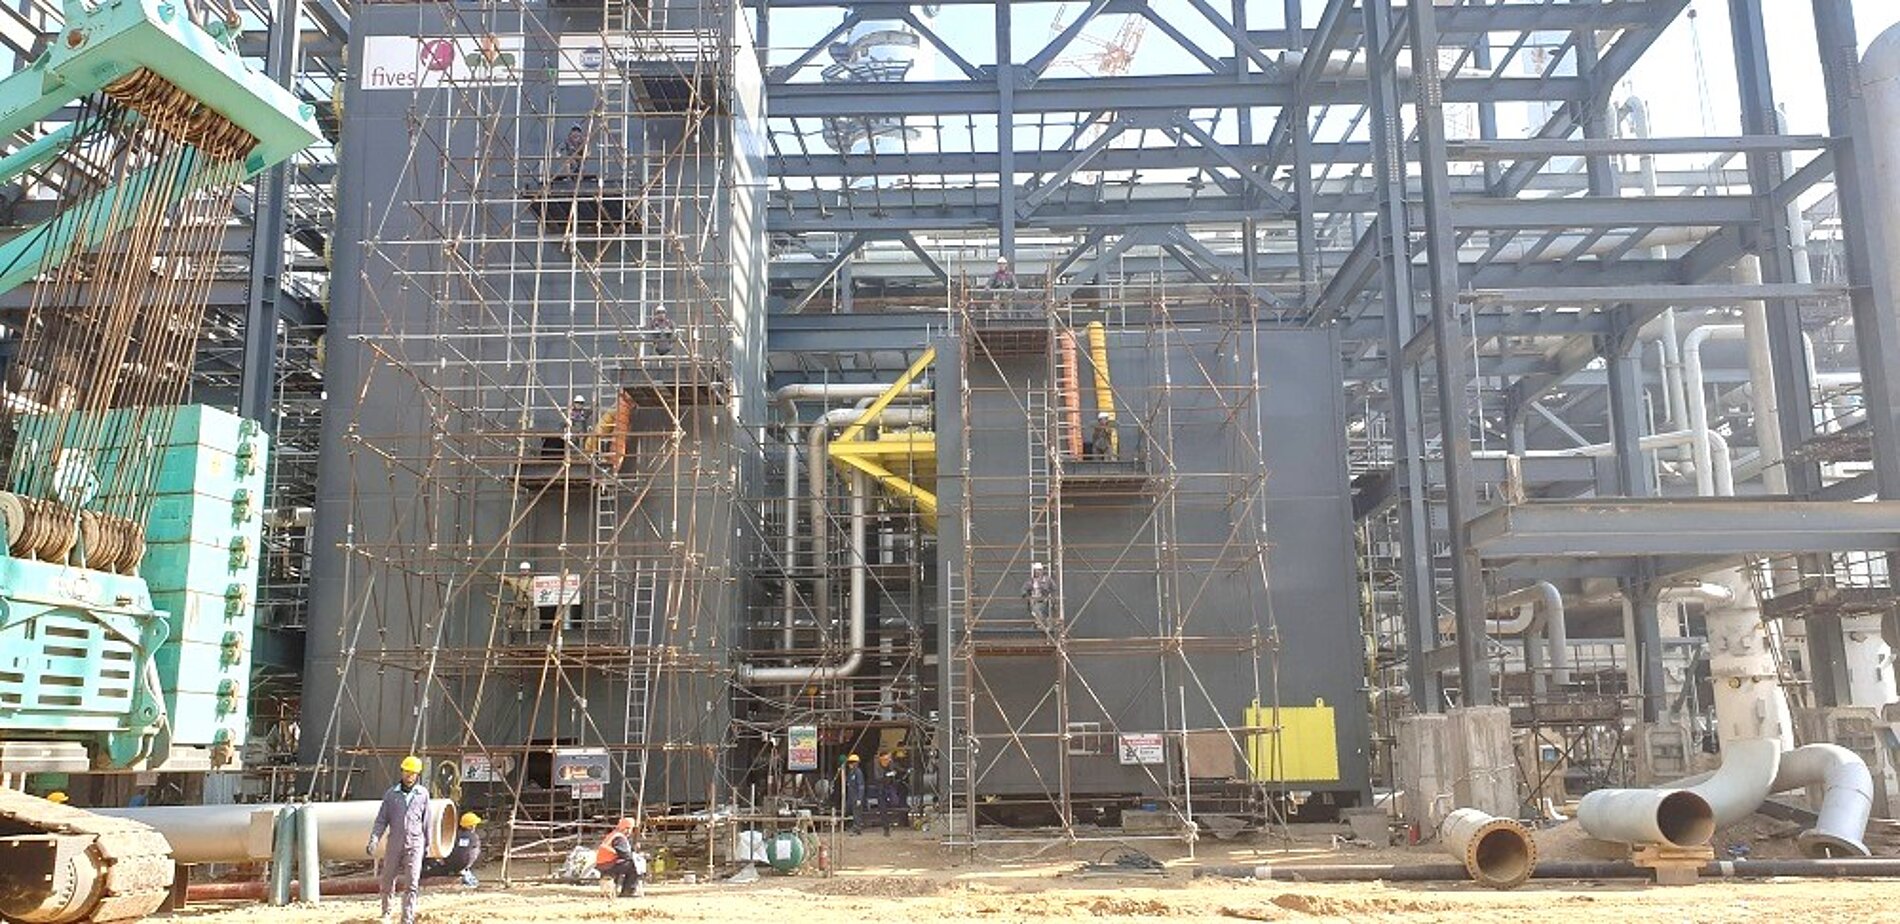 Fives completes an installation in the Bathinda petrochemical project